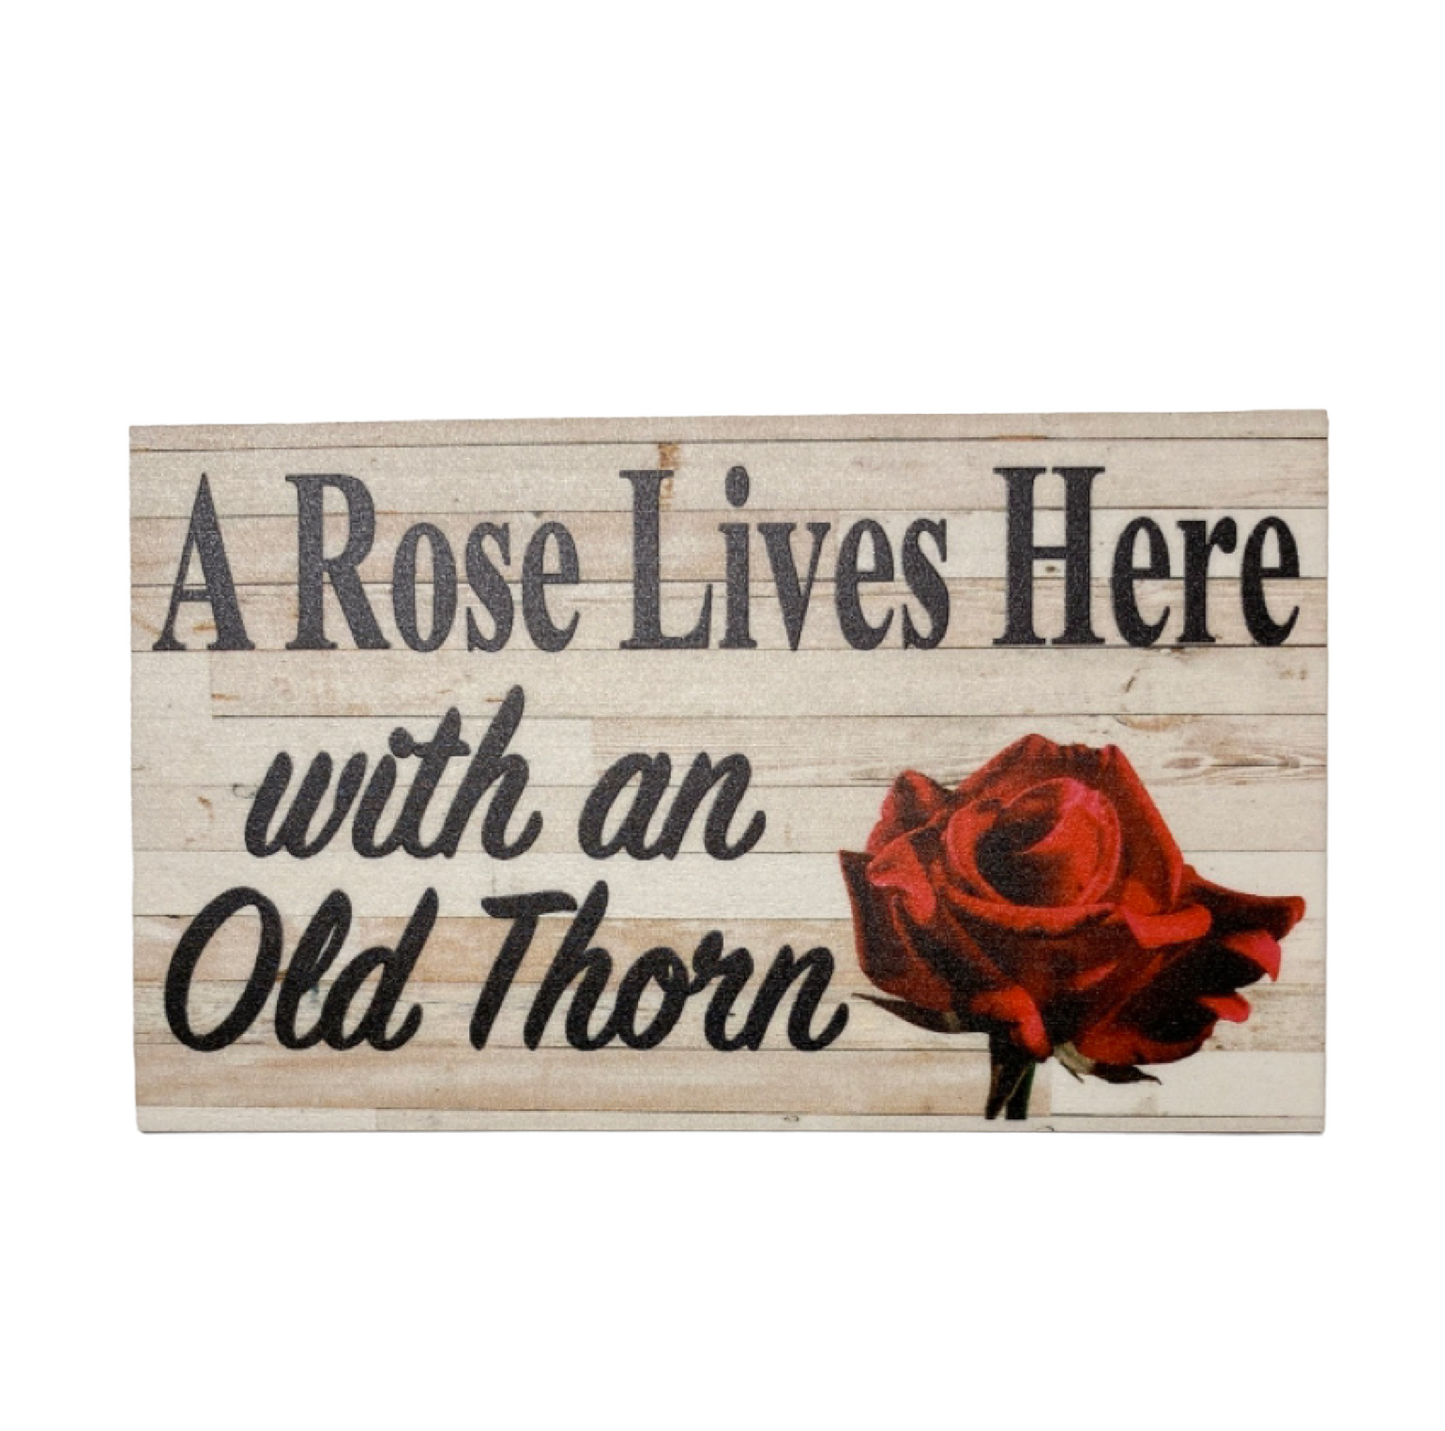 Rose Lives Here With Old Thorn Garden Funny Sign - The Renmy Store Homewares & Gifts 